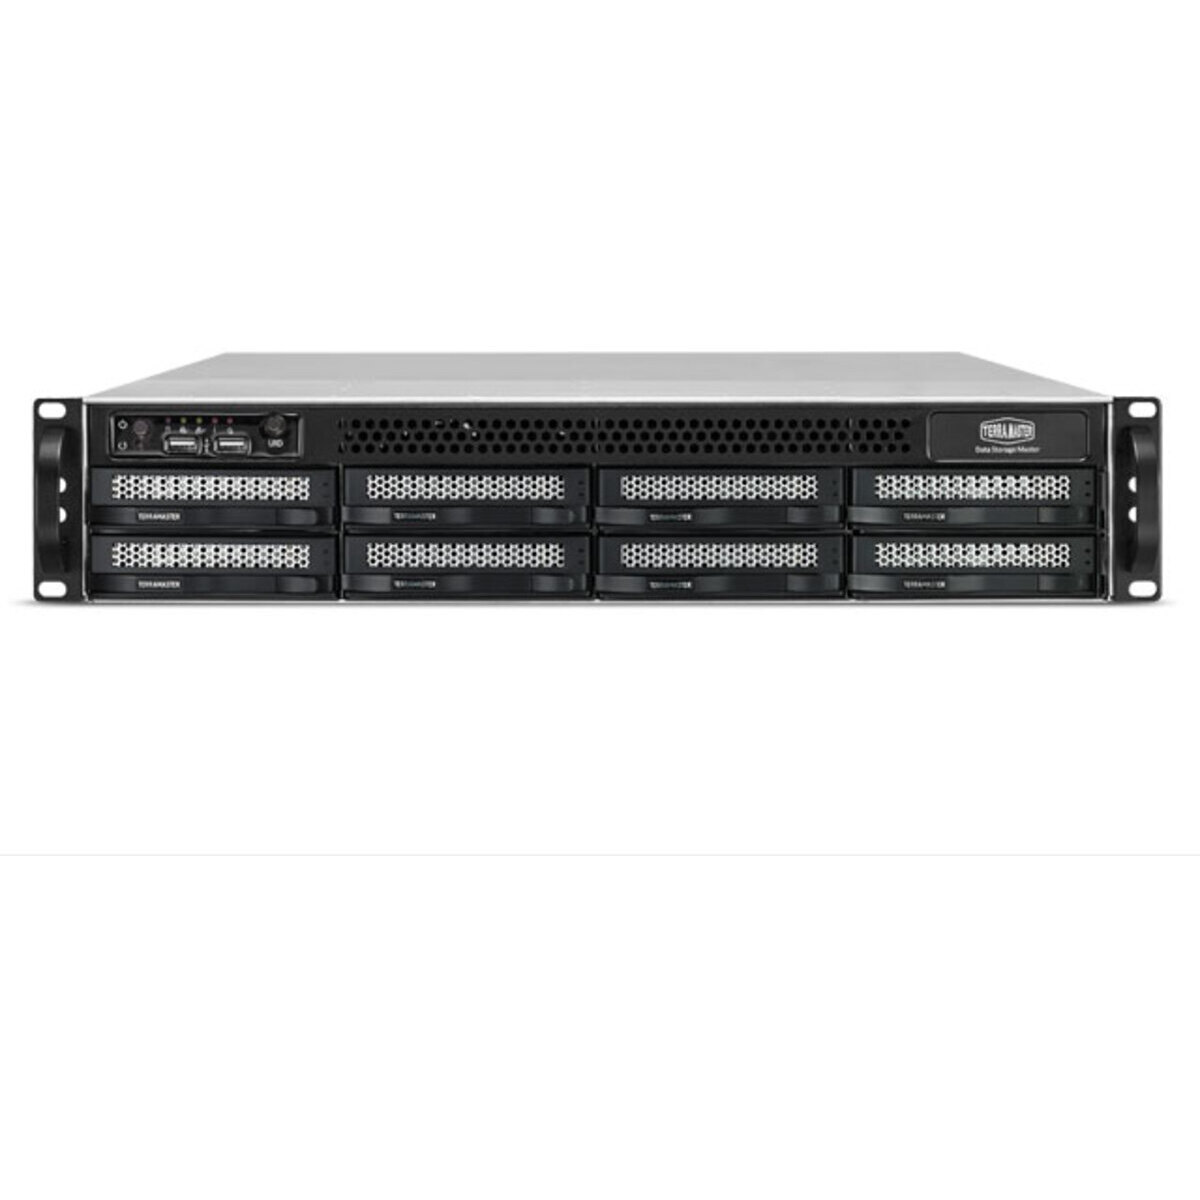 TerraMaster U8-722-2224 42tb 8-Bay RackMount Large Business / Enterprise NAS - Network Attached Storage Device 7x6tb Seagate BarraCuda ST6000DM003 3.5 5400rpm SATA 6Gb/s HDD CONSUMER Class Drives Installed - Burn-In Tested U8-722-2224